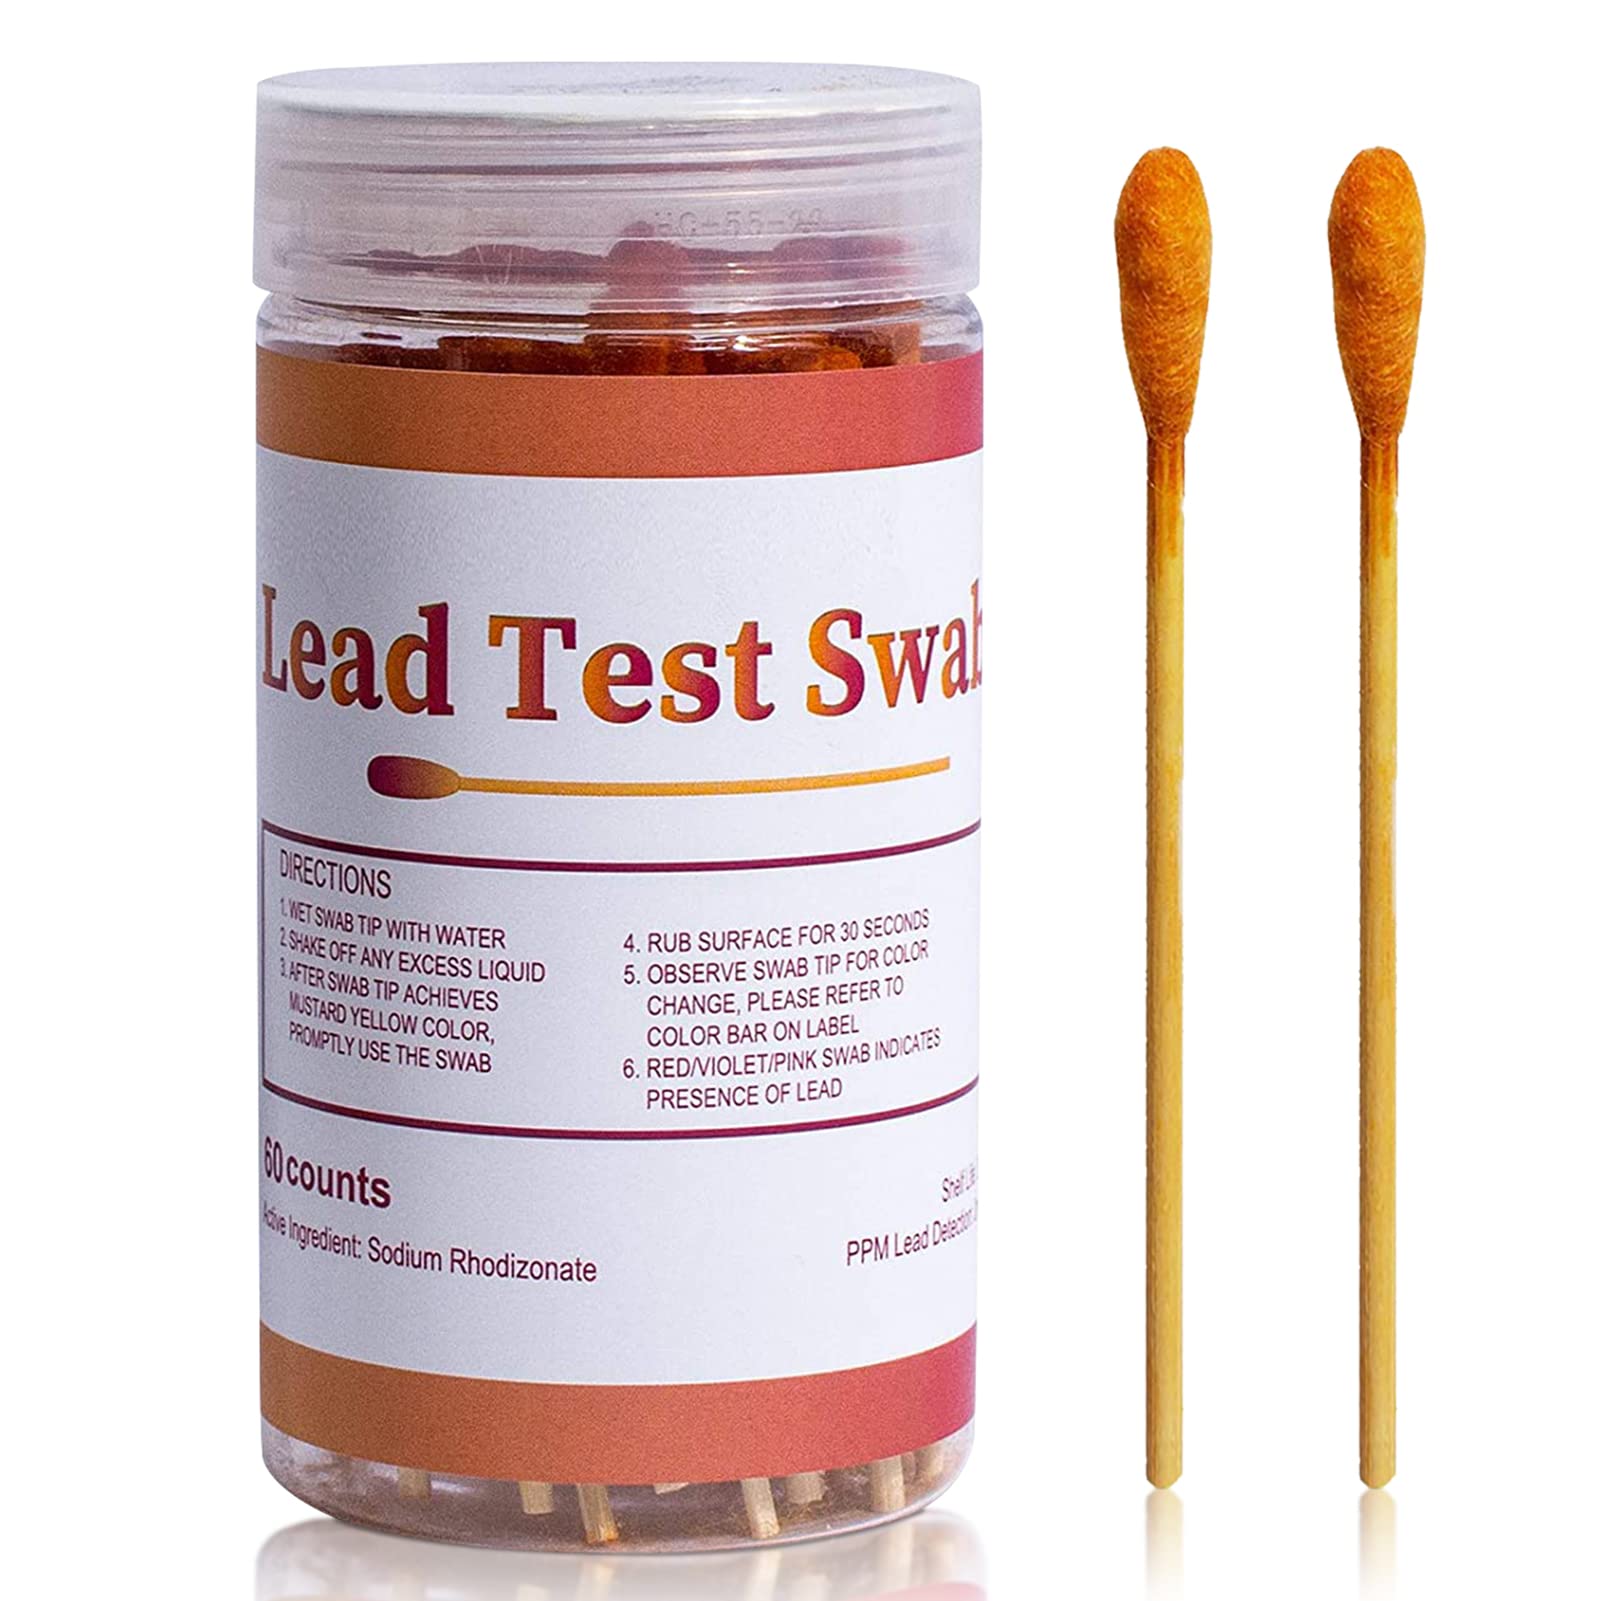 Comfort Hub Lead Test Kit With 60 Pcs Lead Testing Swabs - Suitable For All Painted Surfaces, Dishes Toy Jewelry Metal Ceramics Wood - Rapid